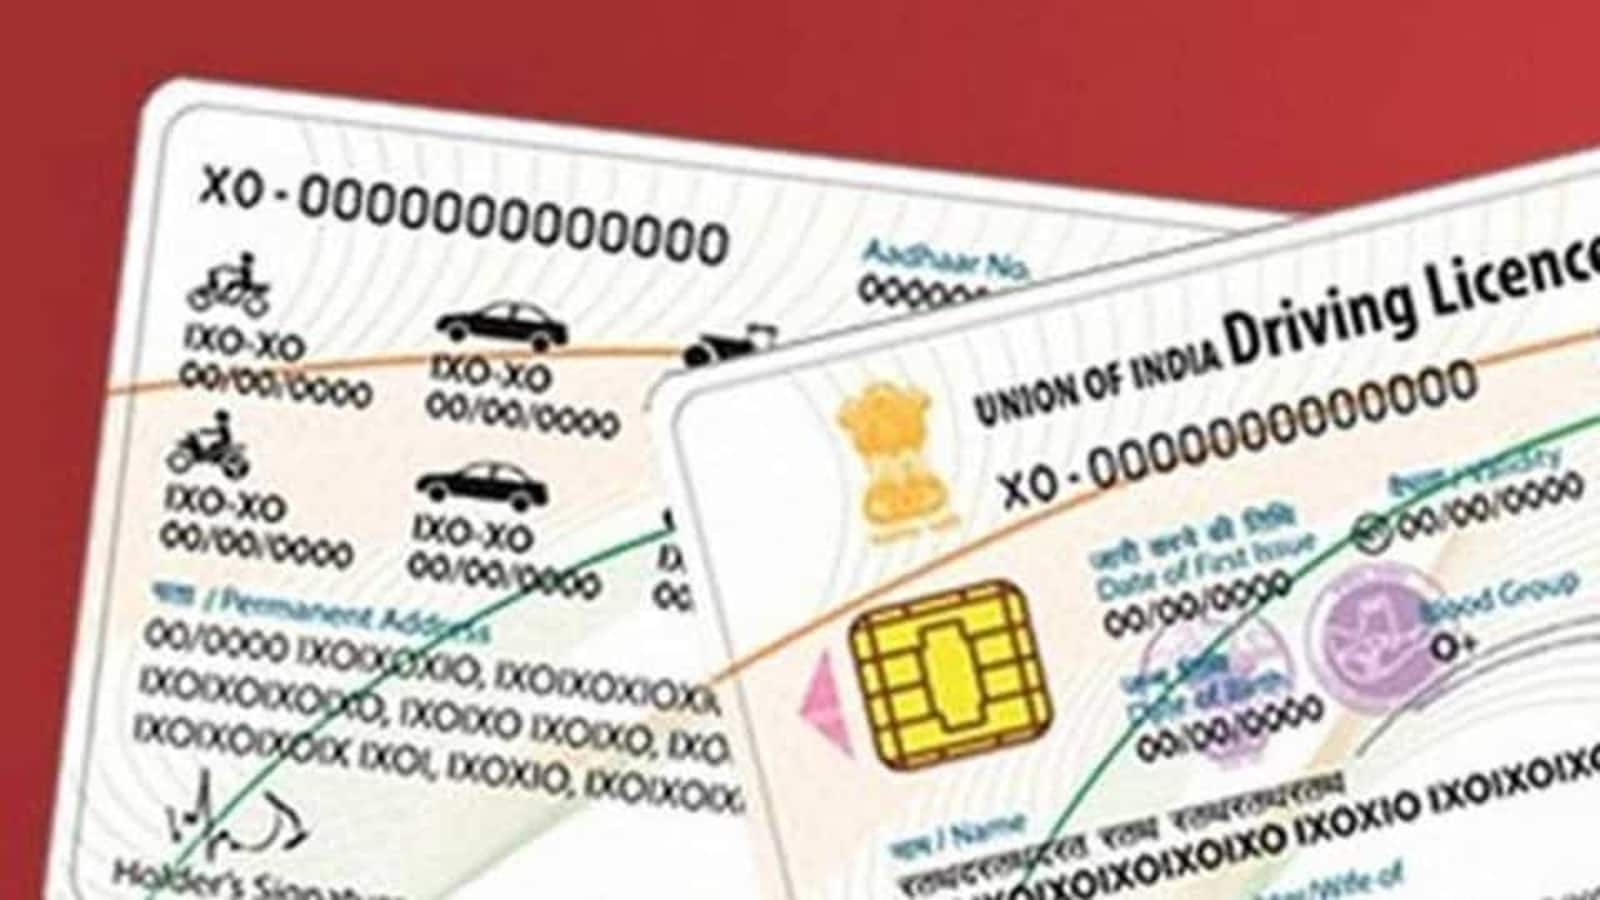 Validity of driving license, vehicle documents extended. Details here |  Latest News India - Hindustan Times